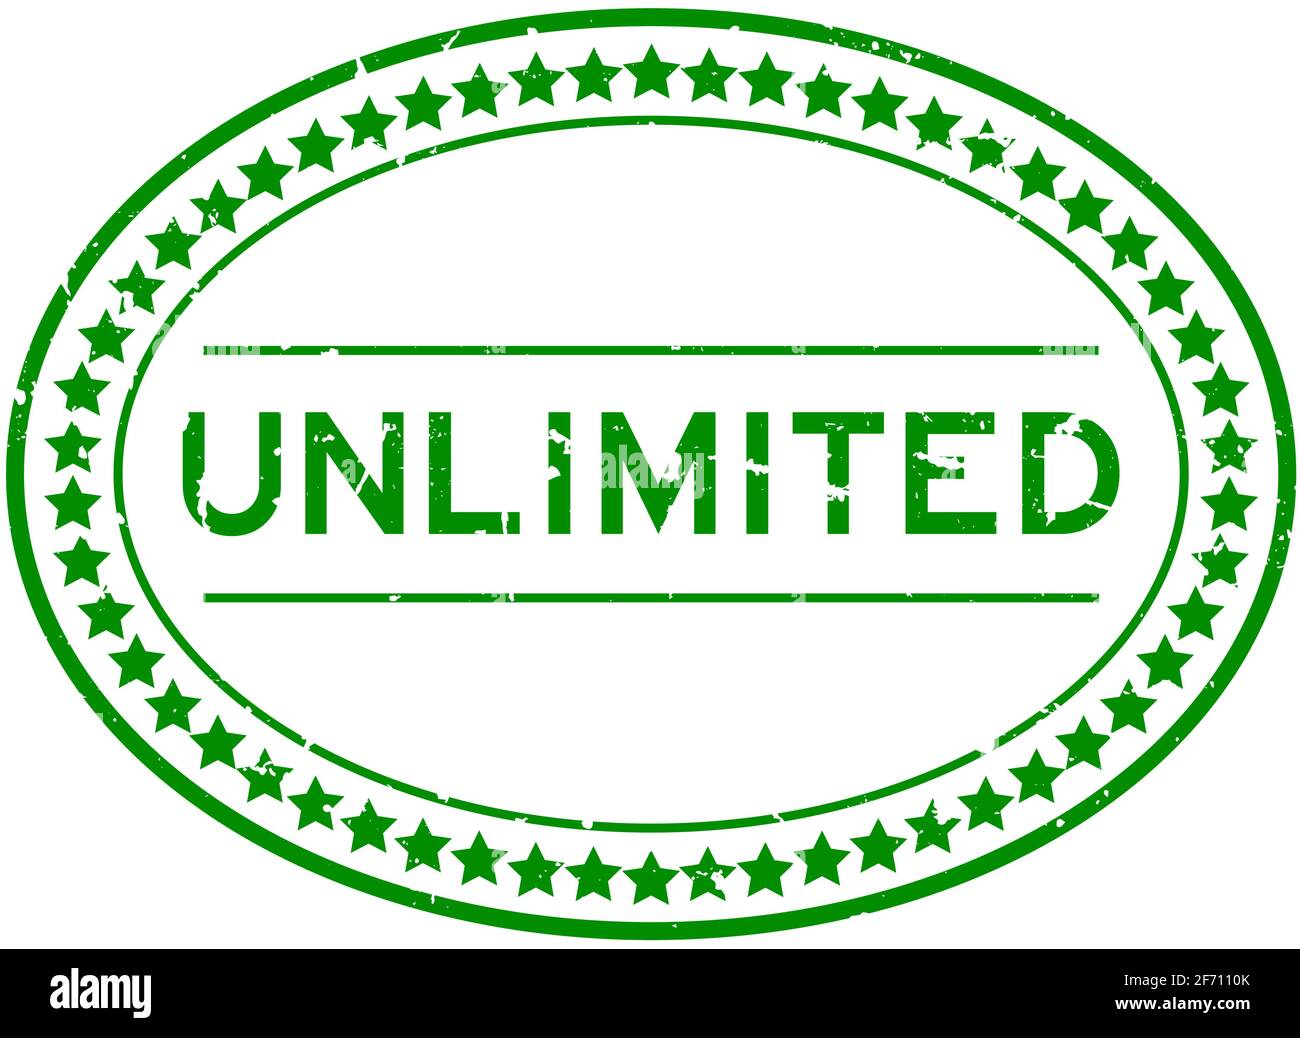 Grunge green unlimited word oval rubber seal stamp on white background Stock Vector